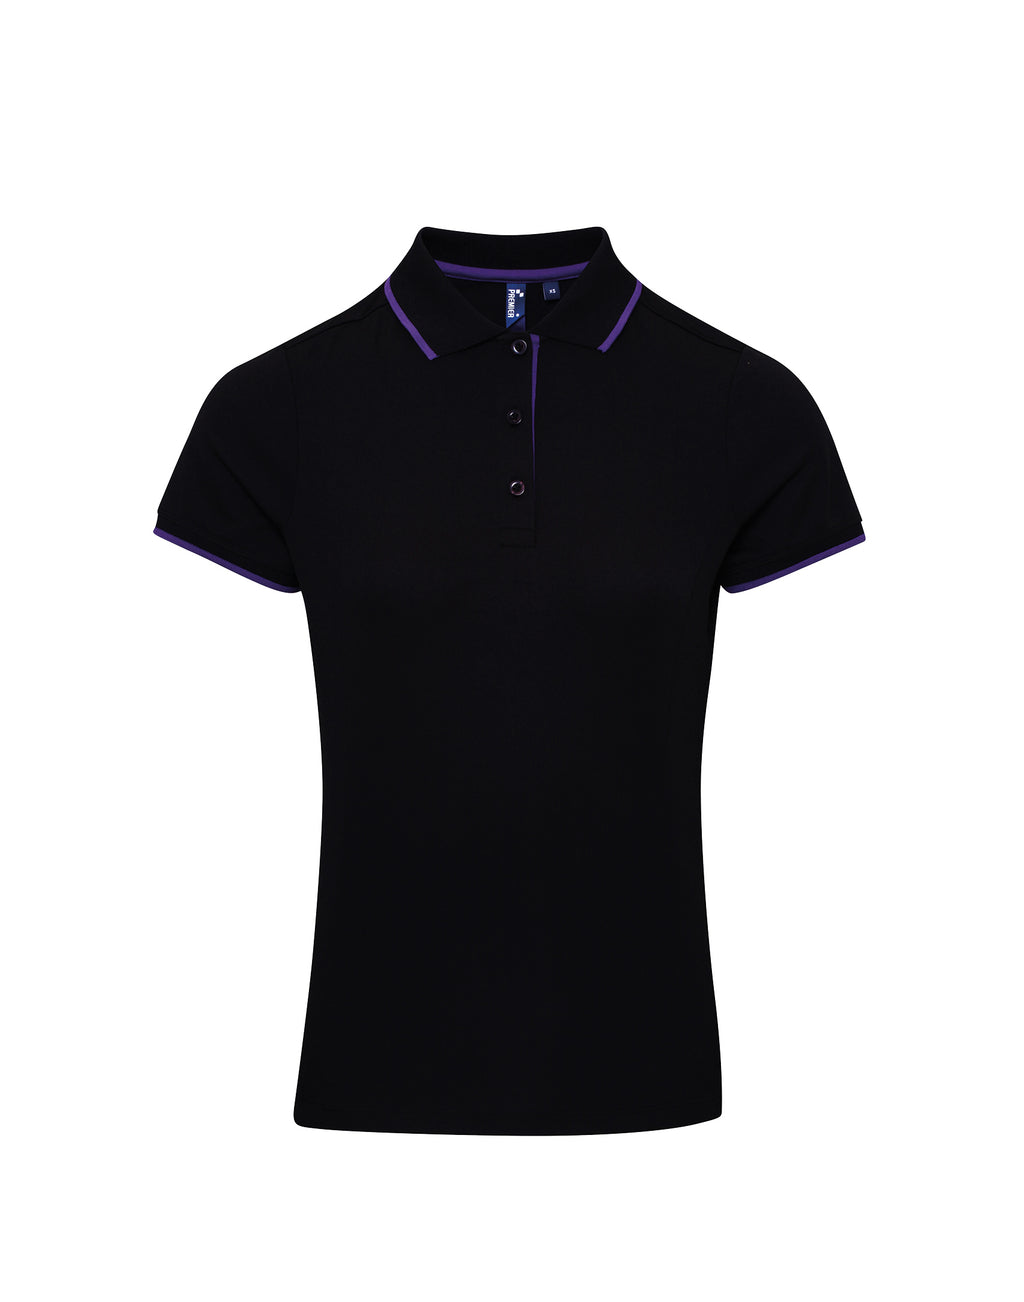 Black Polo for Business Casual Settings